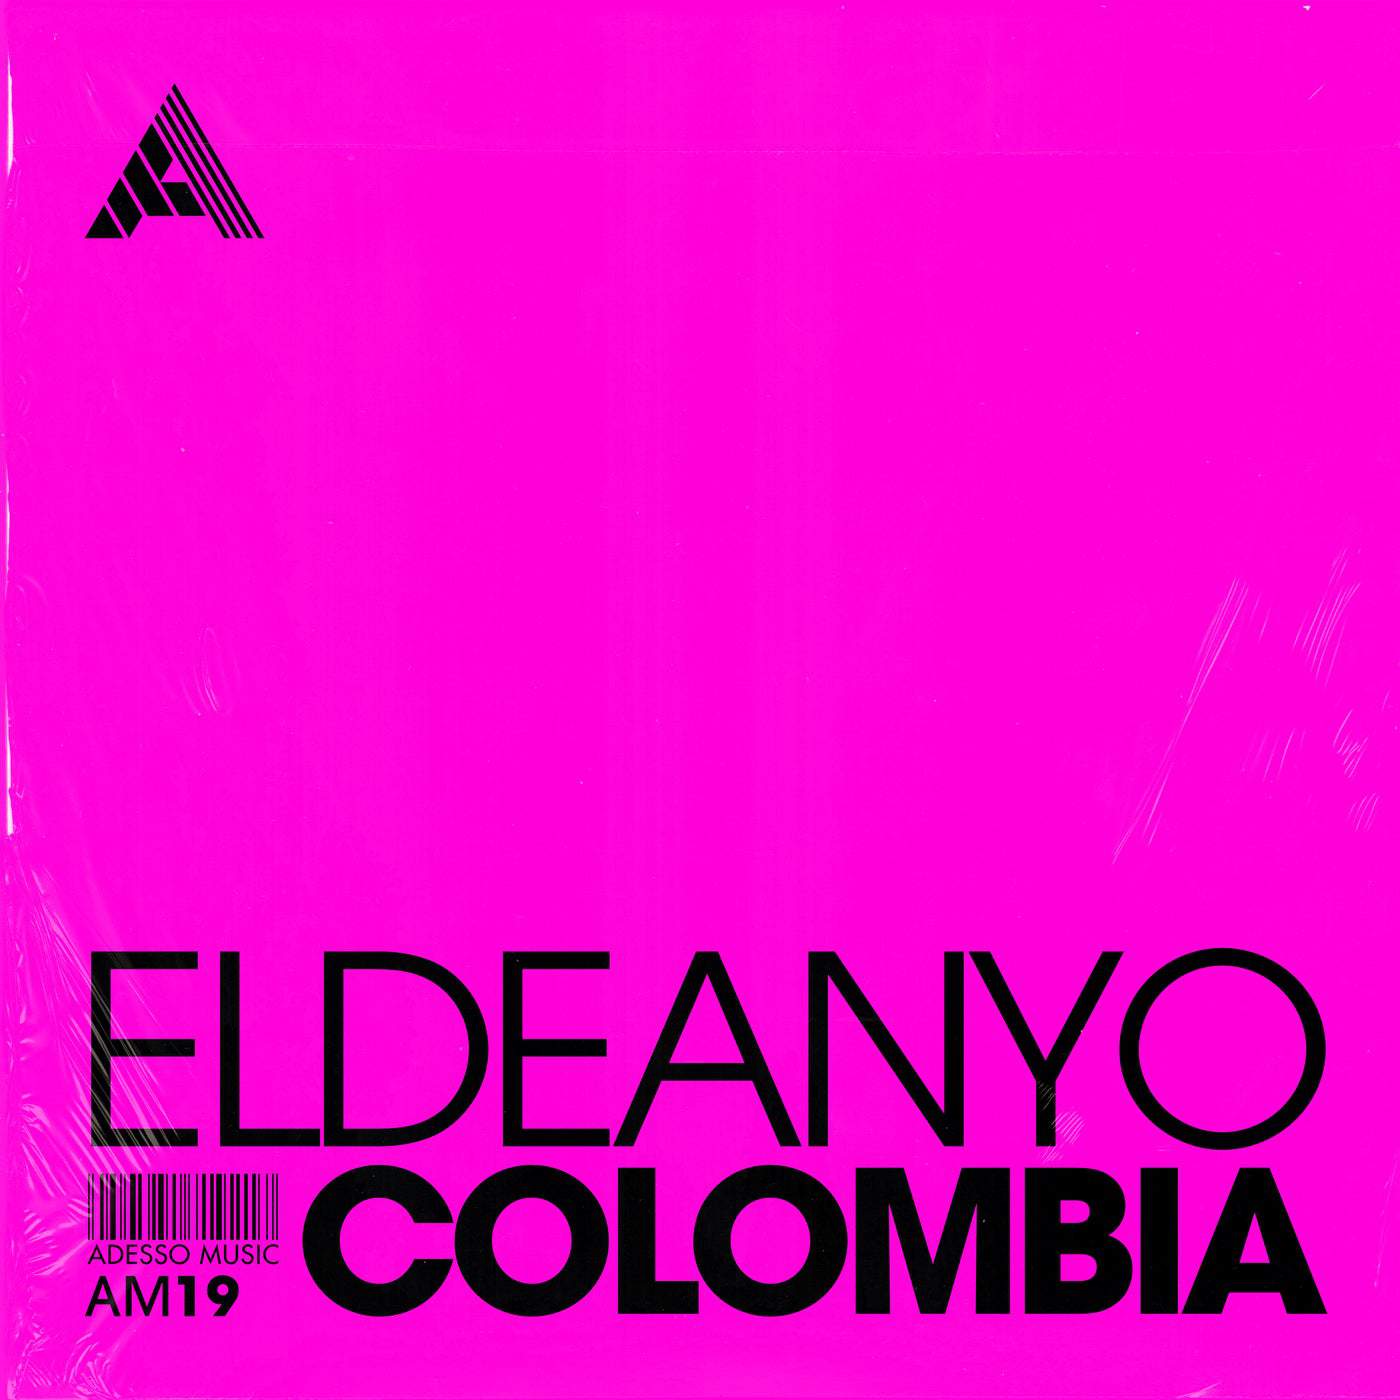 image cover: Eldeanyo - Colombia - Extended Mix / AM19